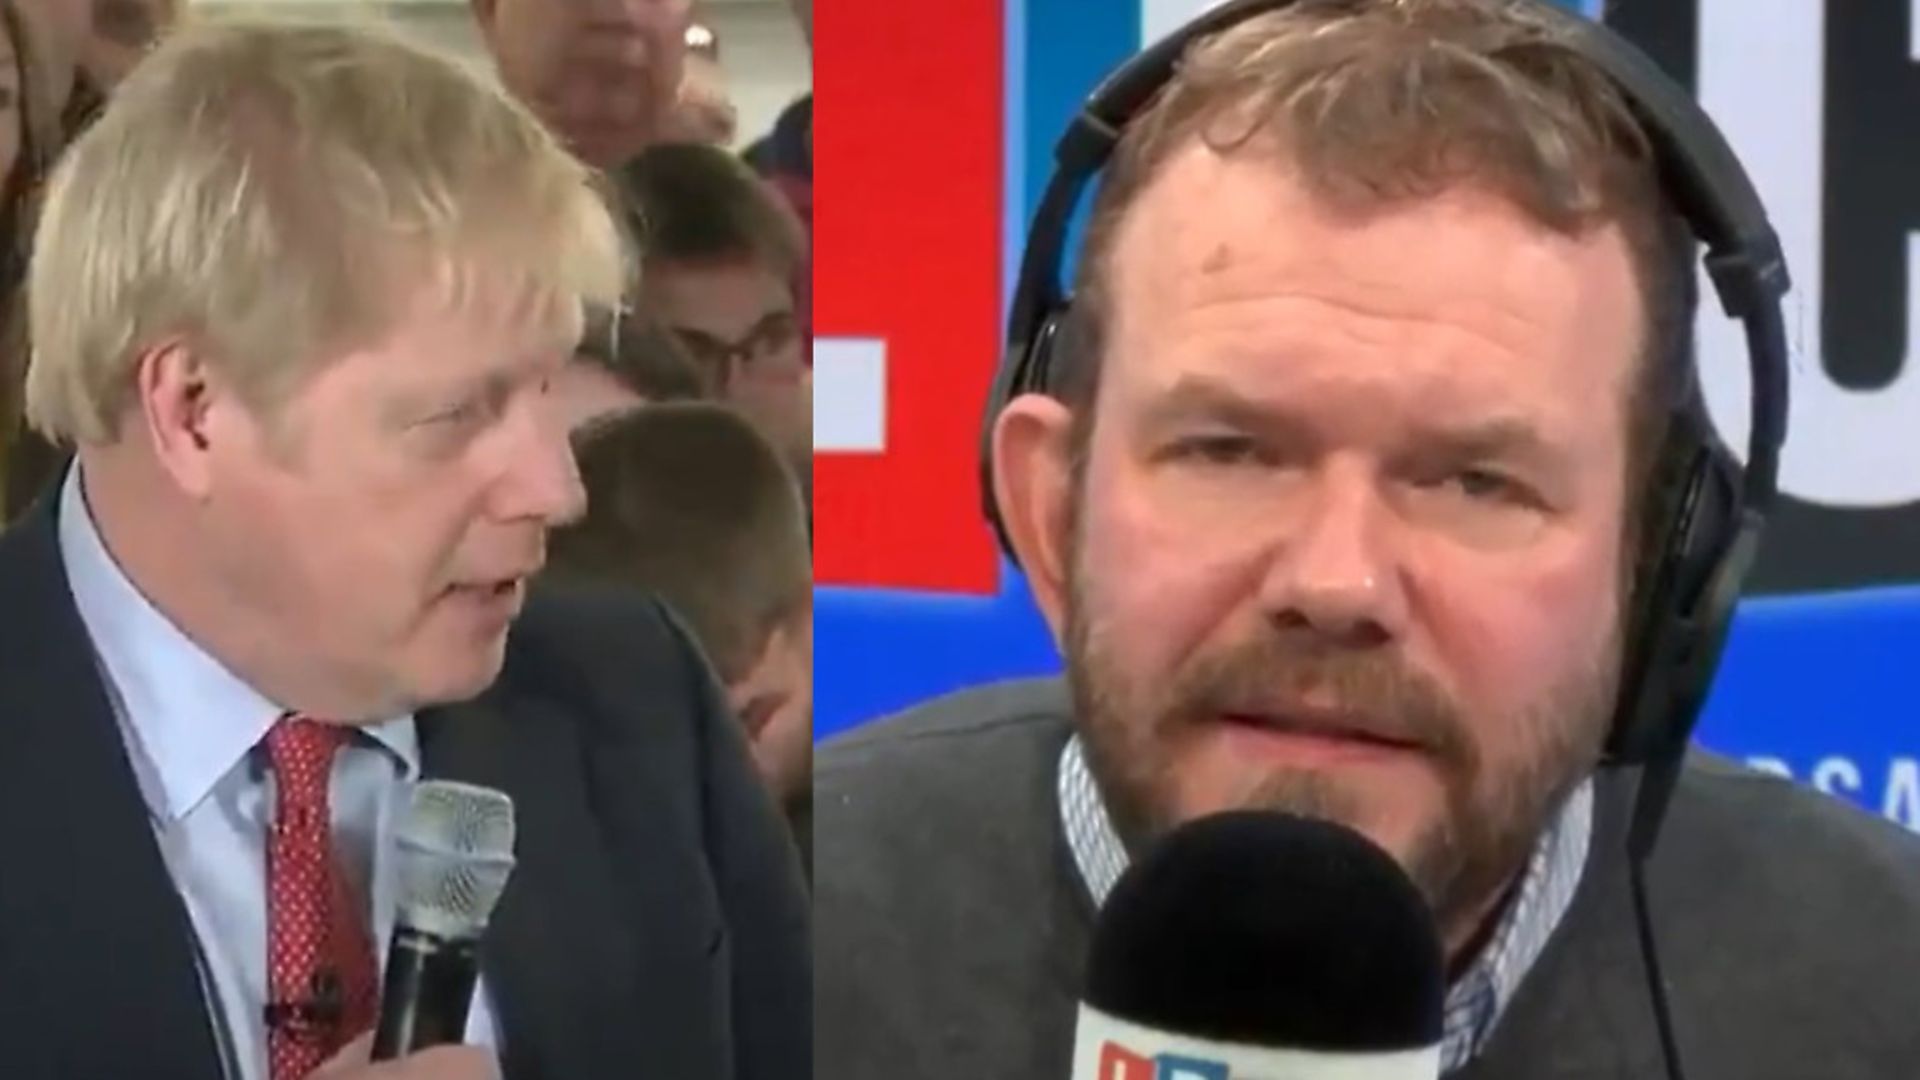 James O'Brien has stepped into the furore over a Boris Johnson quote which the Conservative party later clarified. Picture: LBC/Channel 4 News - Credit: LBC/Channel 4 News